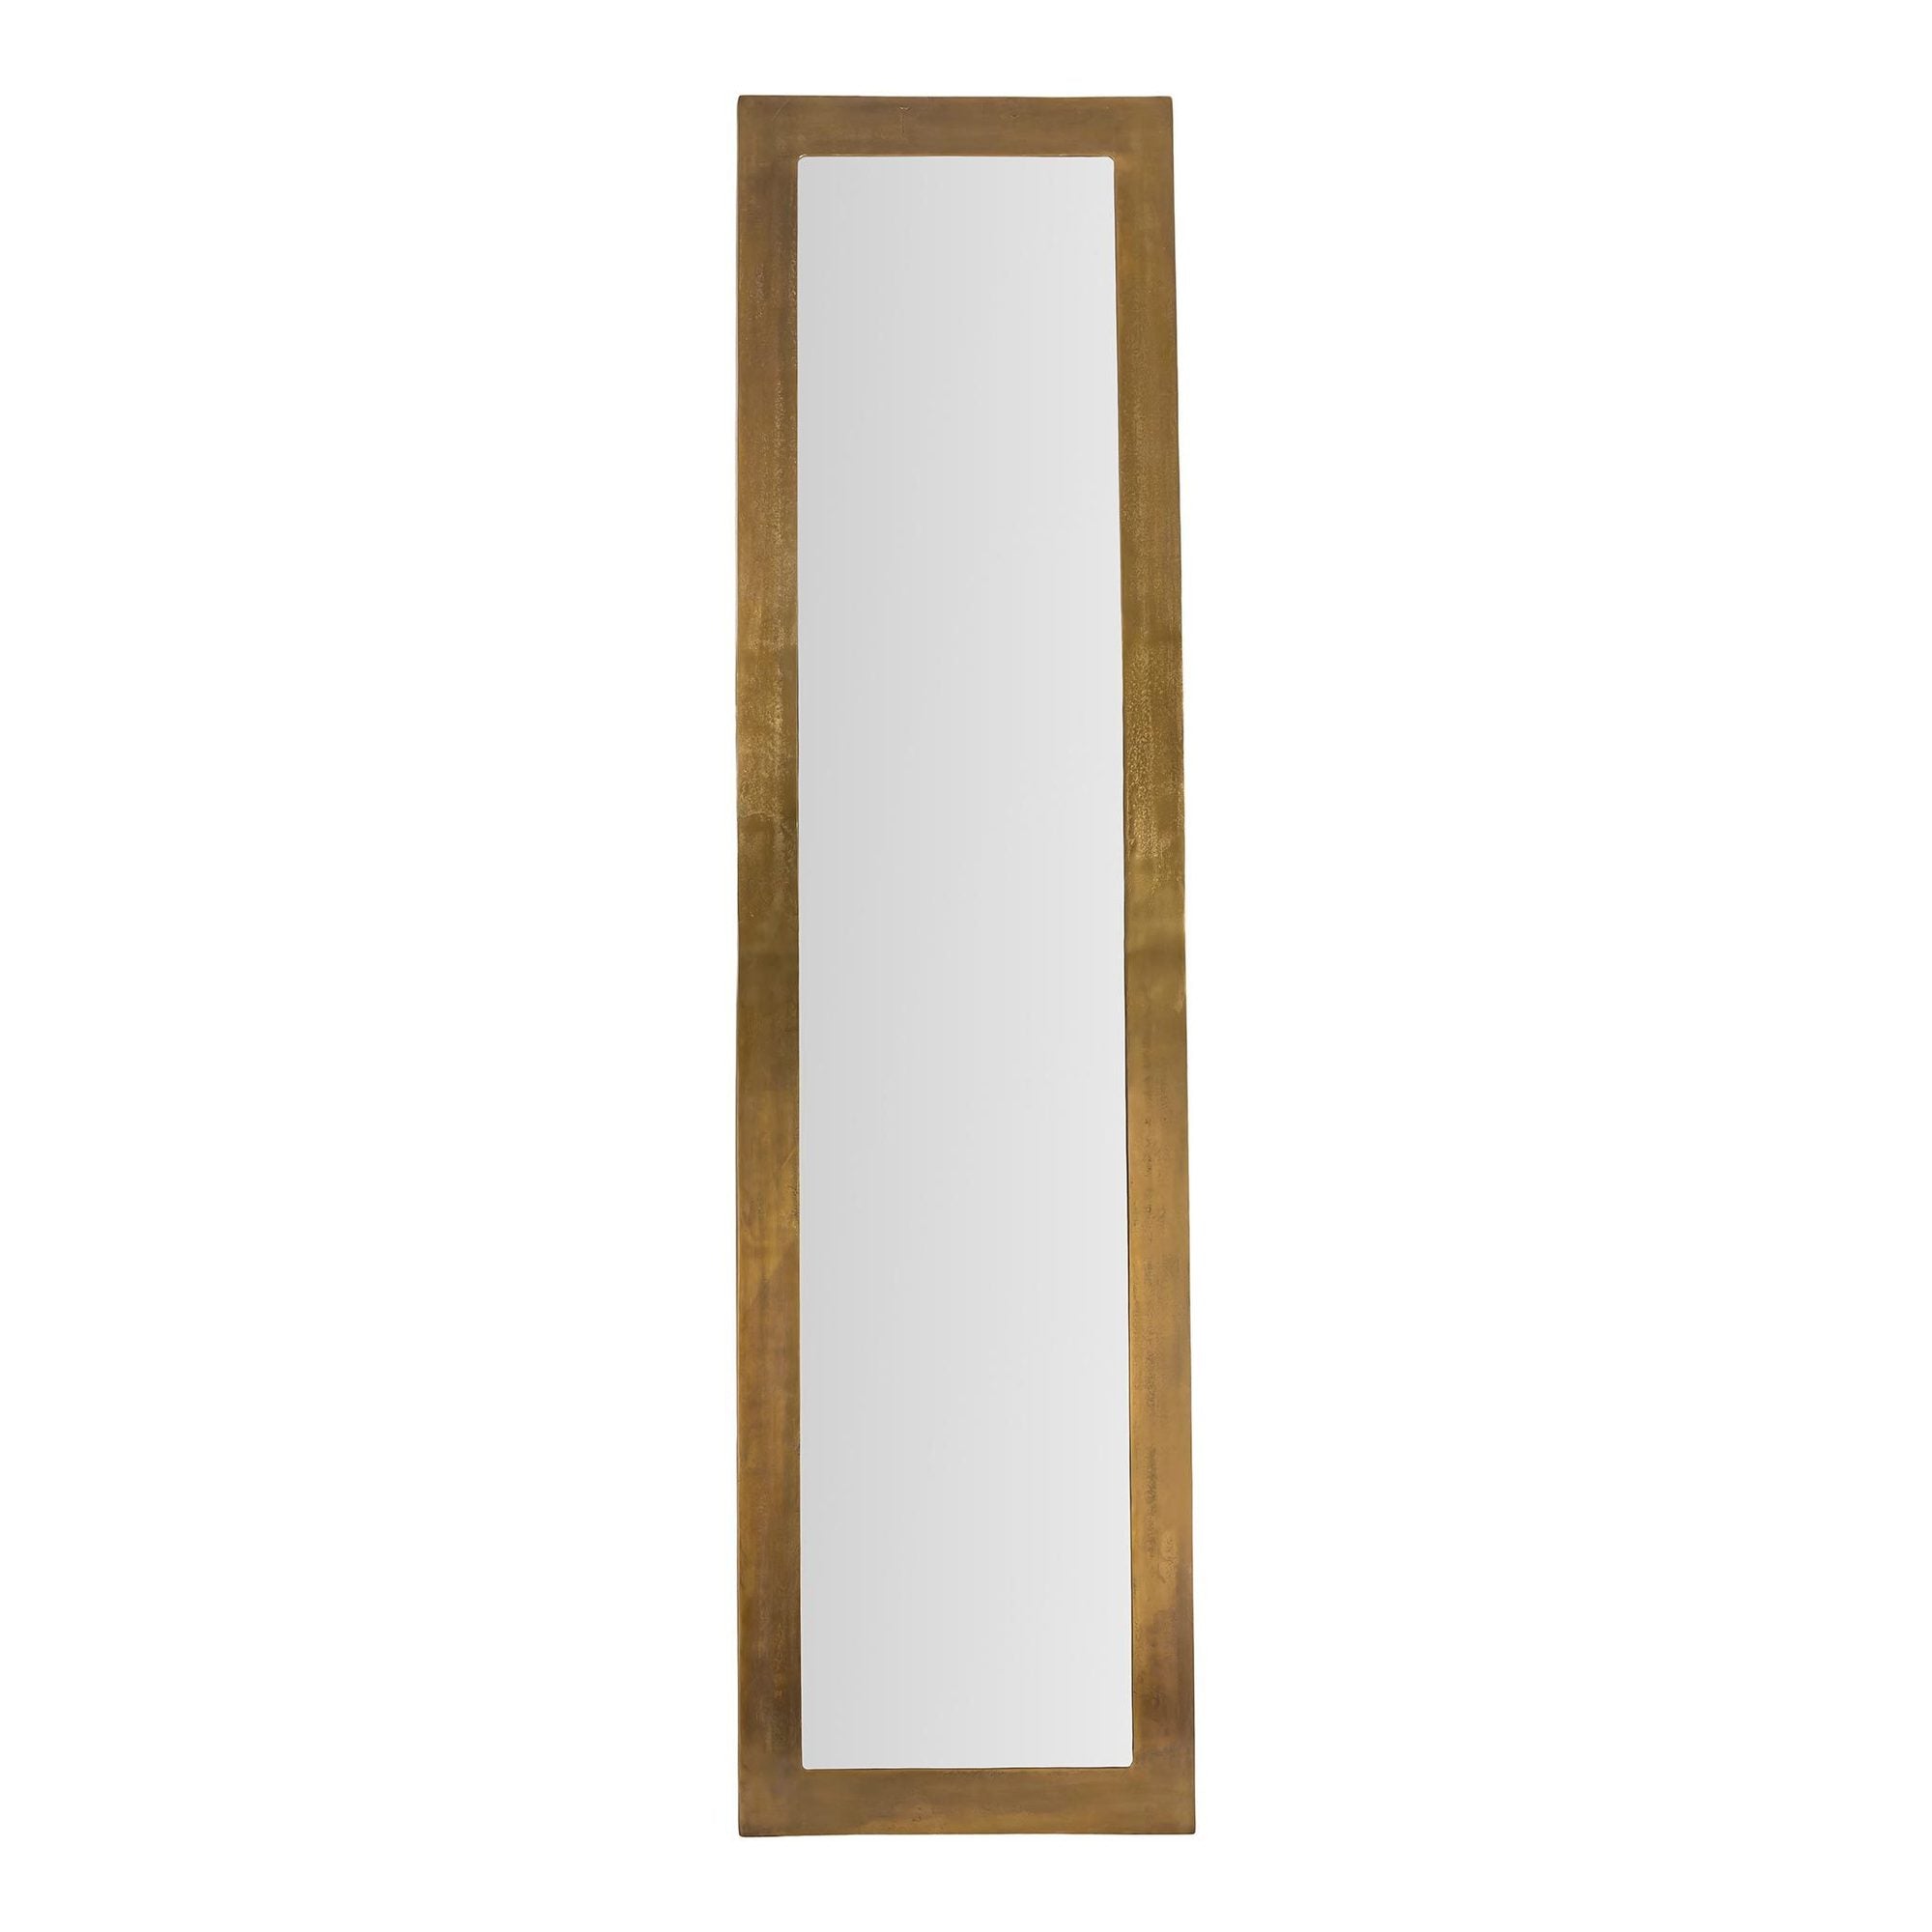 MOES-CATE TALL MIRROR-Floor Mirrors-MODTEMPO